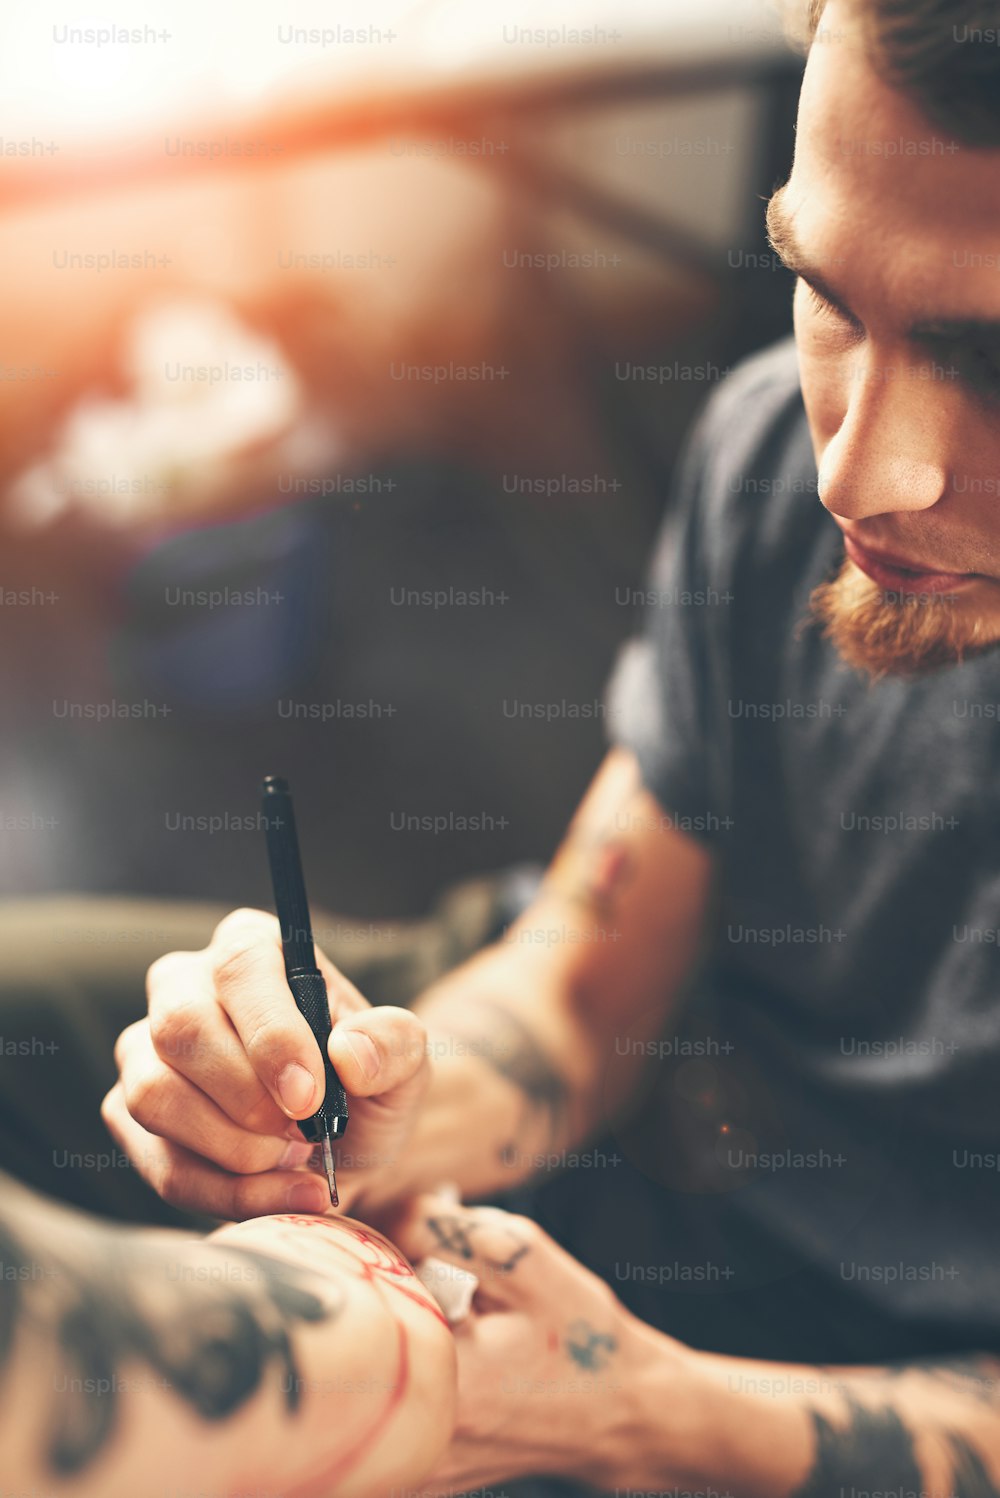 A young guy, a tattoo artist preparing for the session, draws a sketch on the body of the client in a welcoming environment